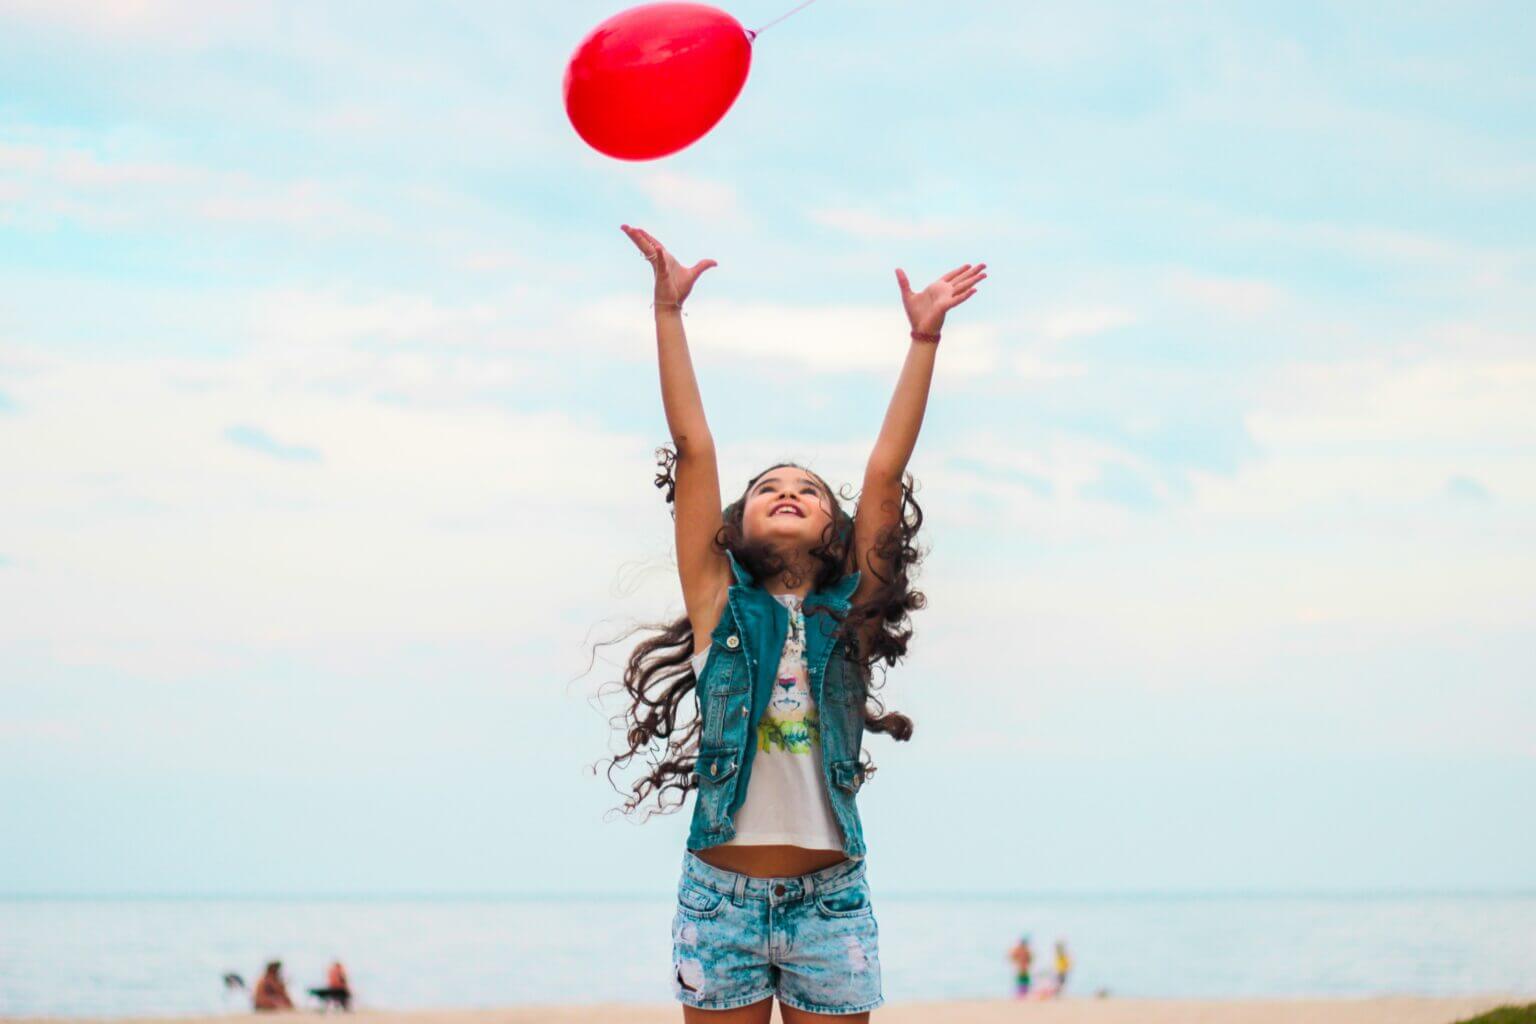 girl raising her hands reaching for a red balloon in the sky